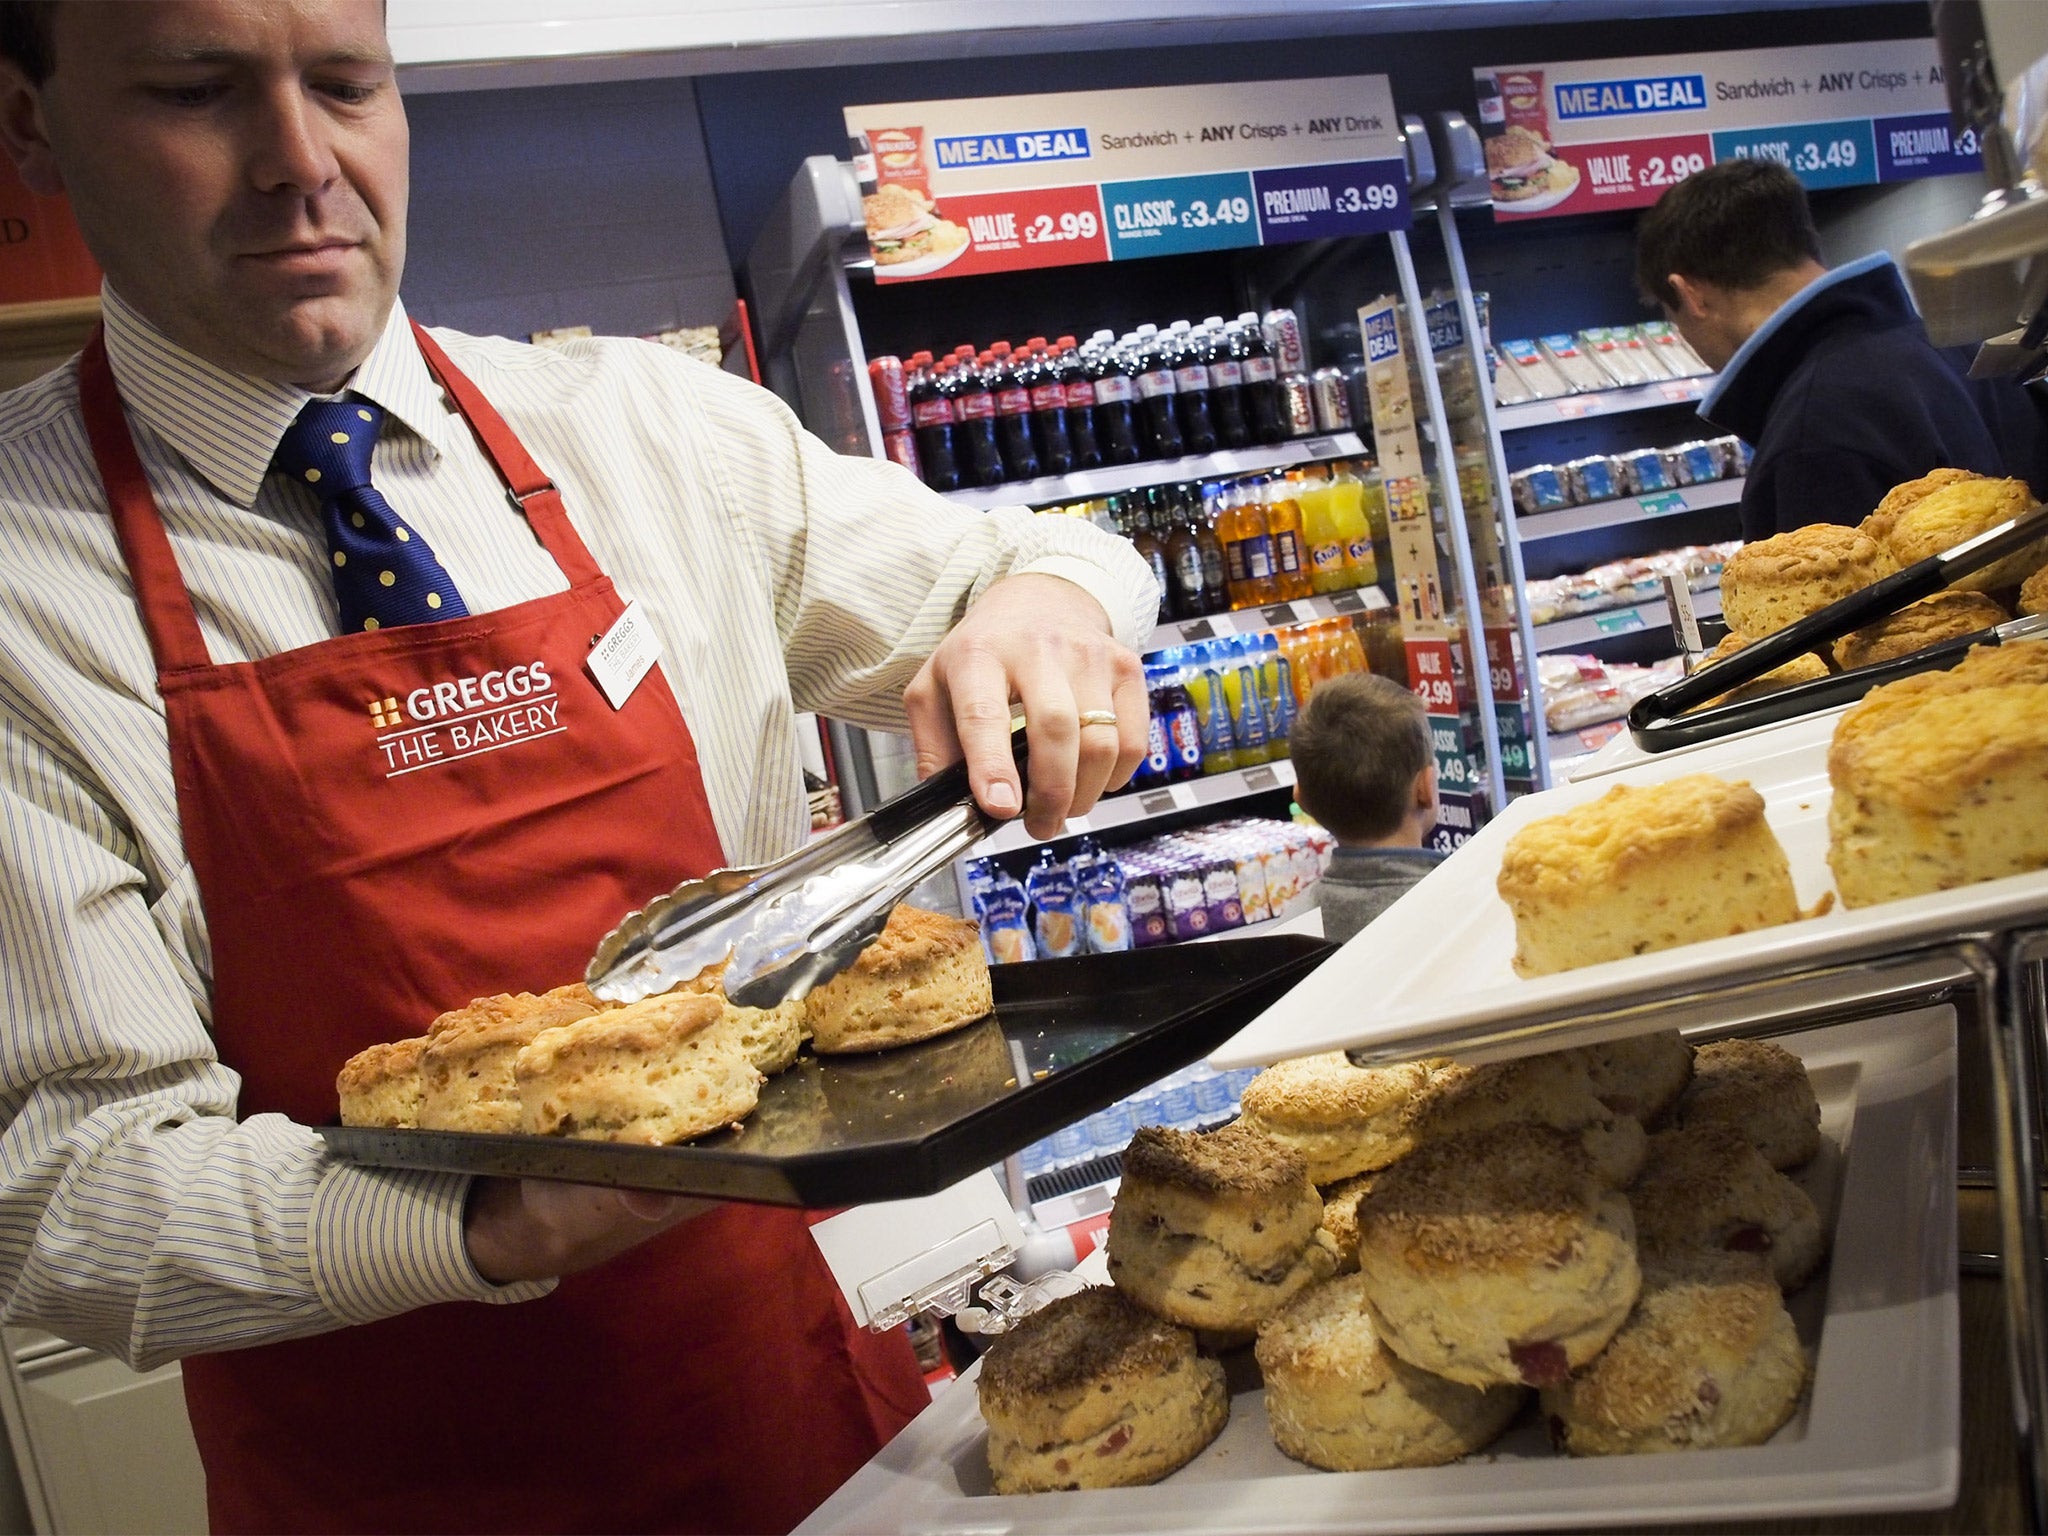 Greggs is making more use of centralised bakeries, letting stores get on with selling meal deals, healthier sandwiches and coffee